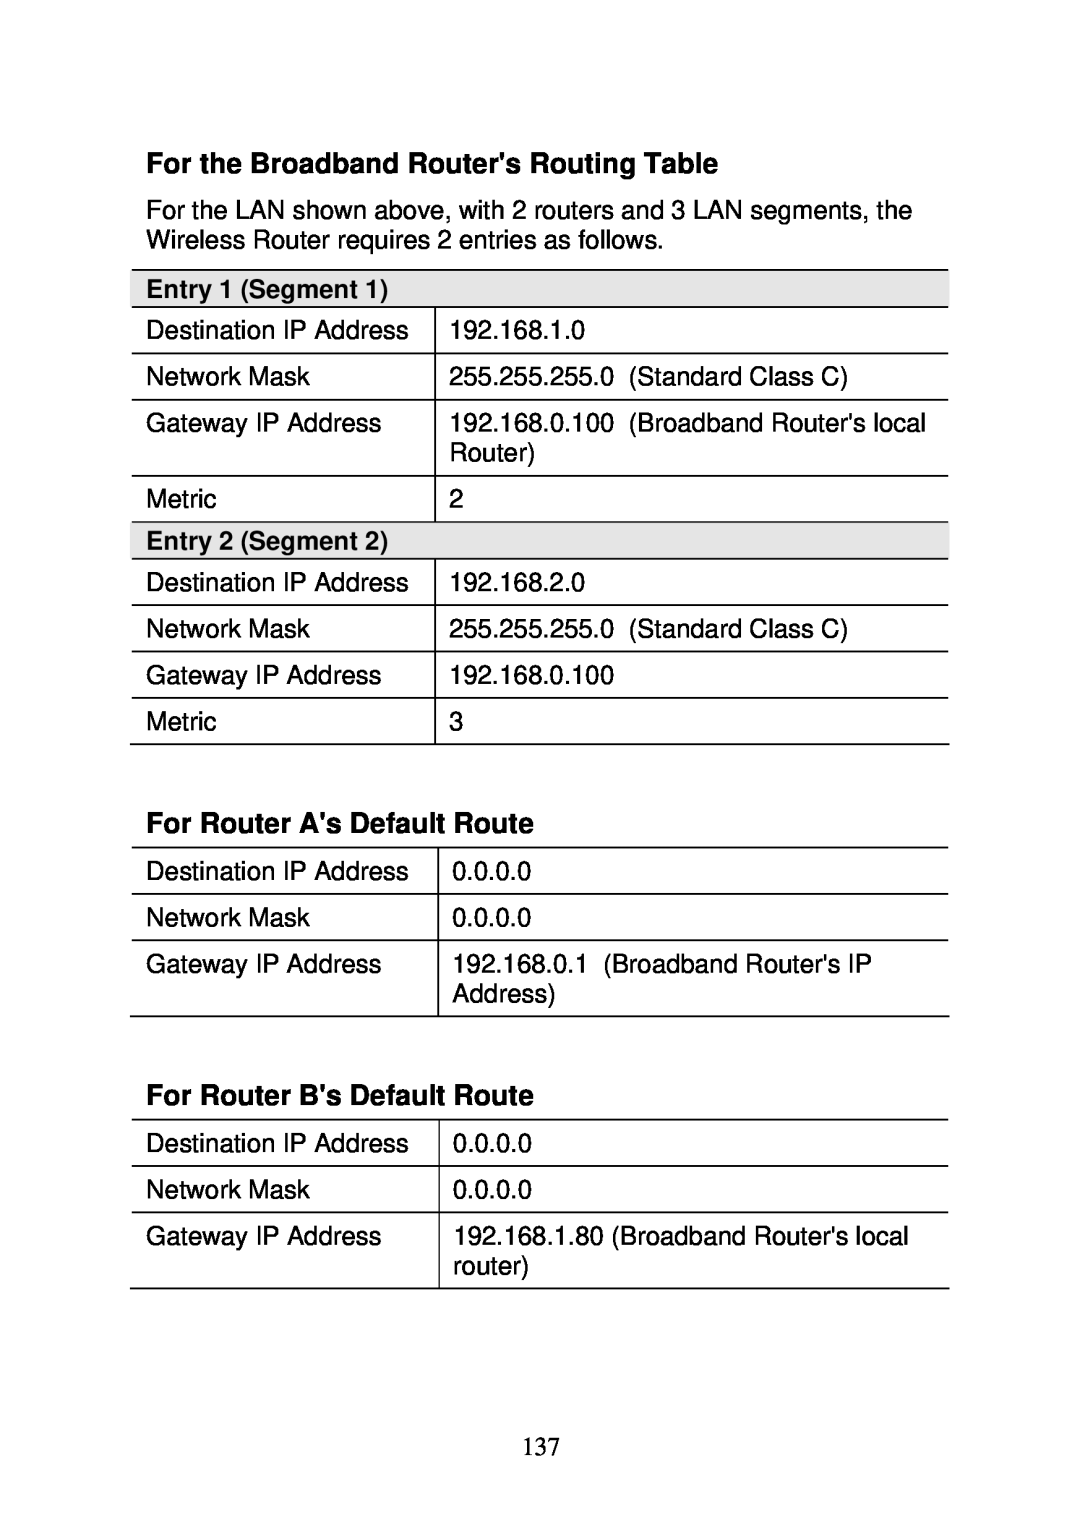 3Com WBR-6000 user manual For the Broadband Routers Routing Table, For Router As Default Route, For Router Bs Default Route 